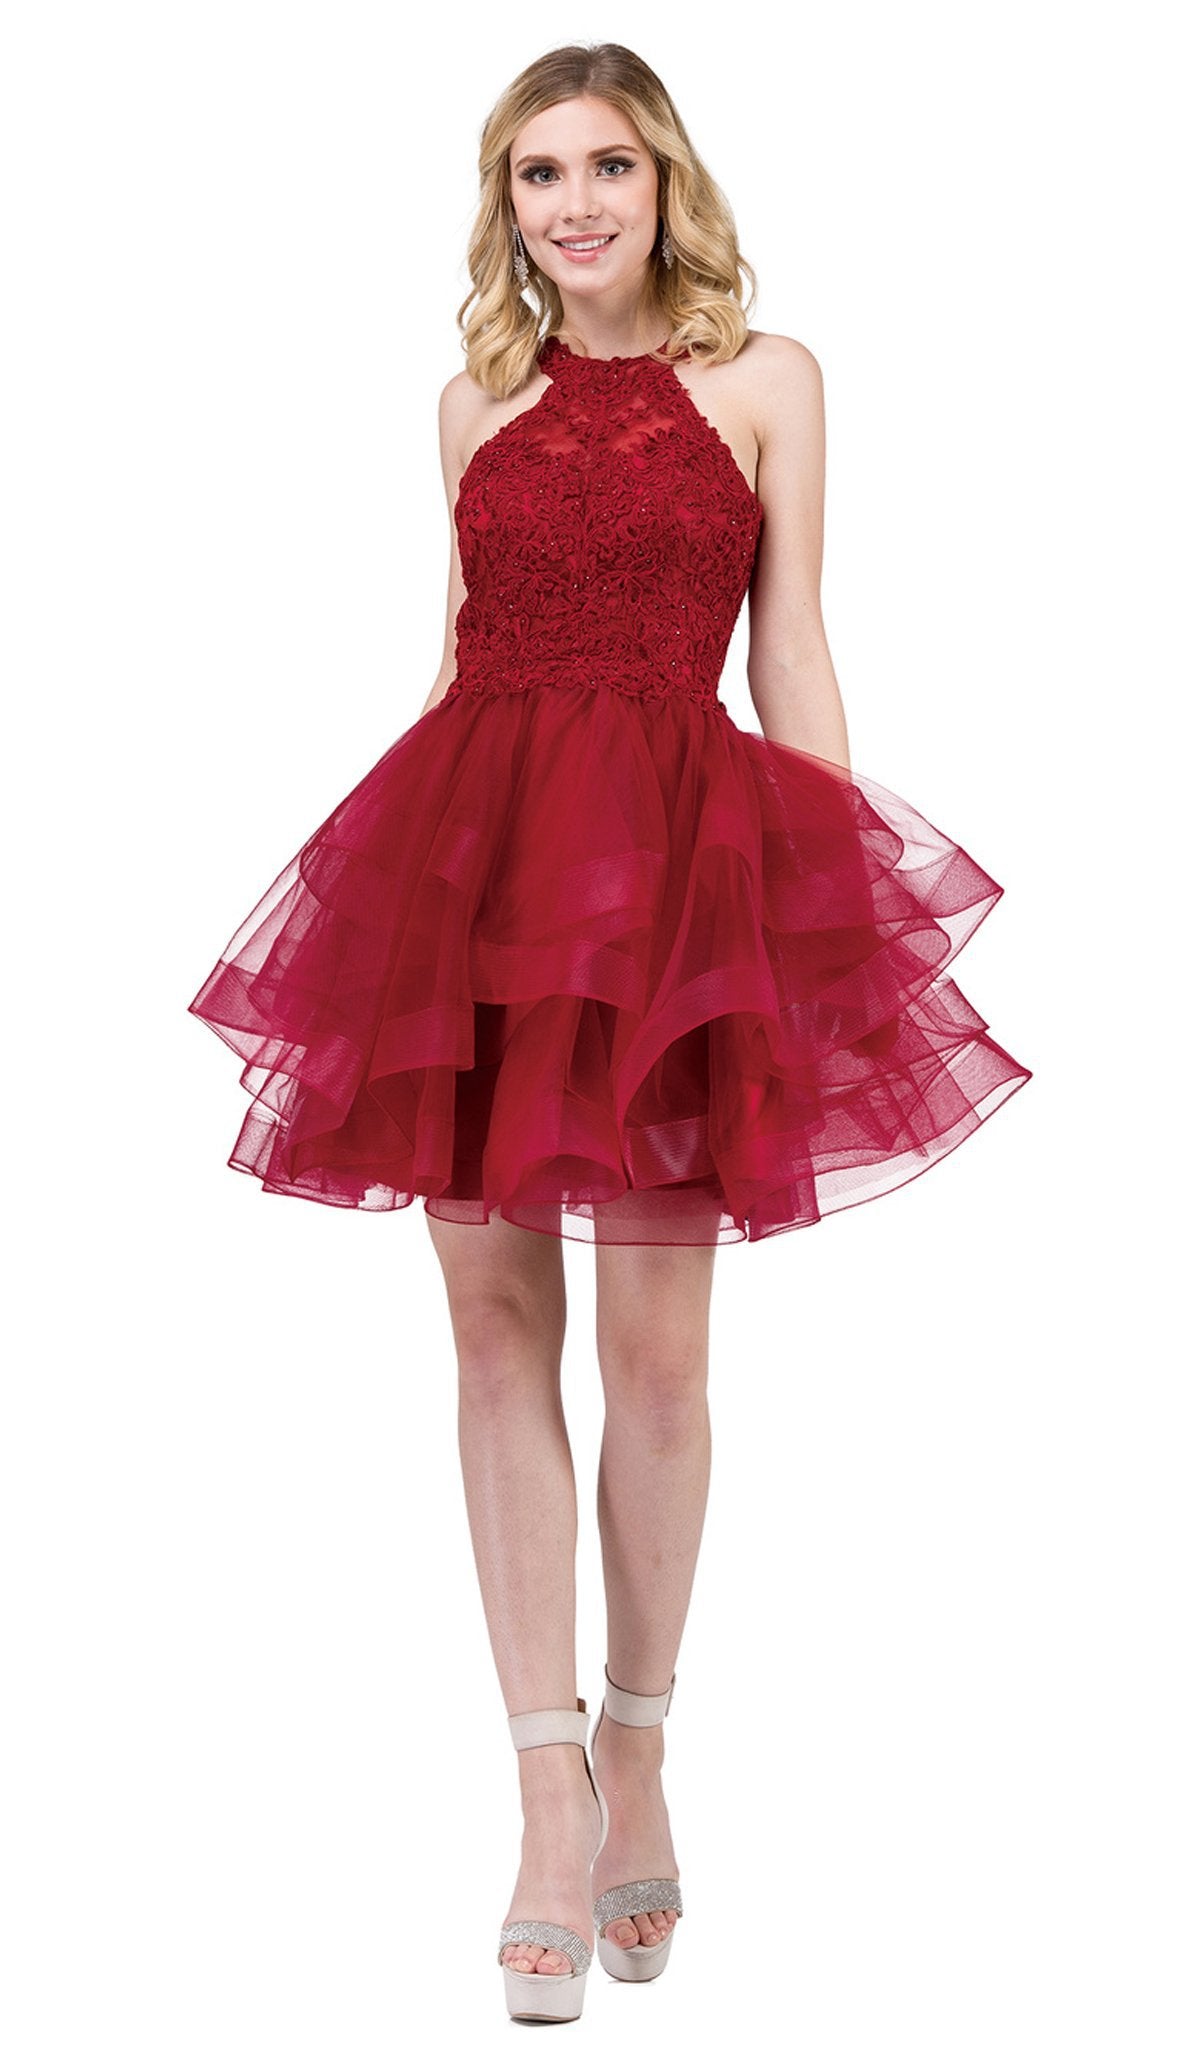 Dancing Queen - 3078 Halter Lace Top and Tulle Skirt Cocktail Dress In Red